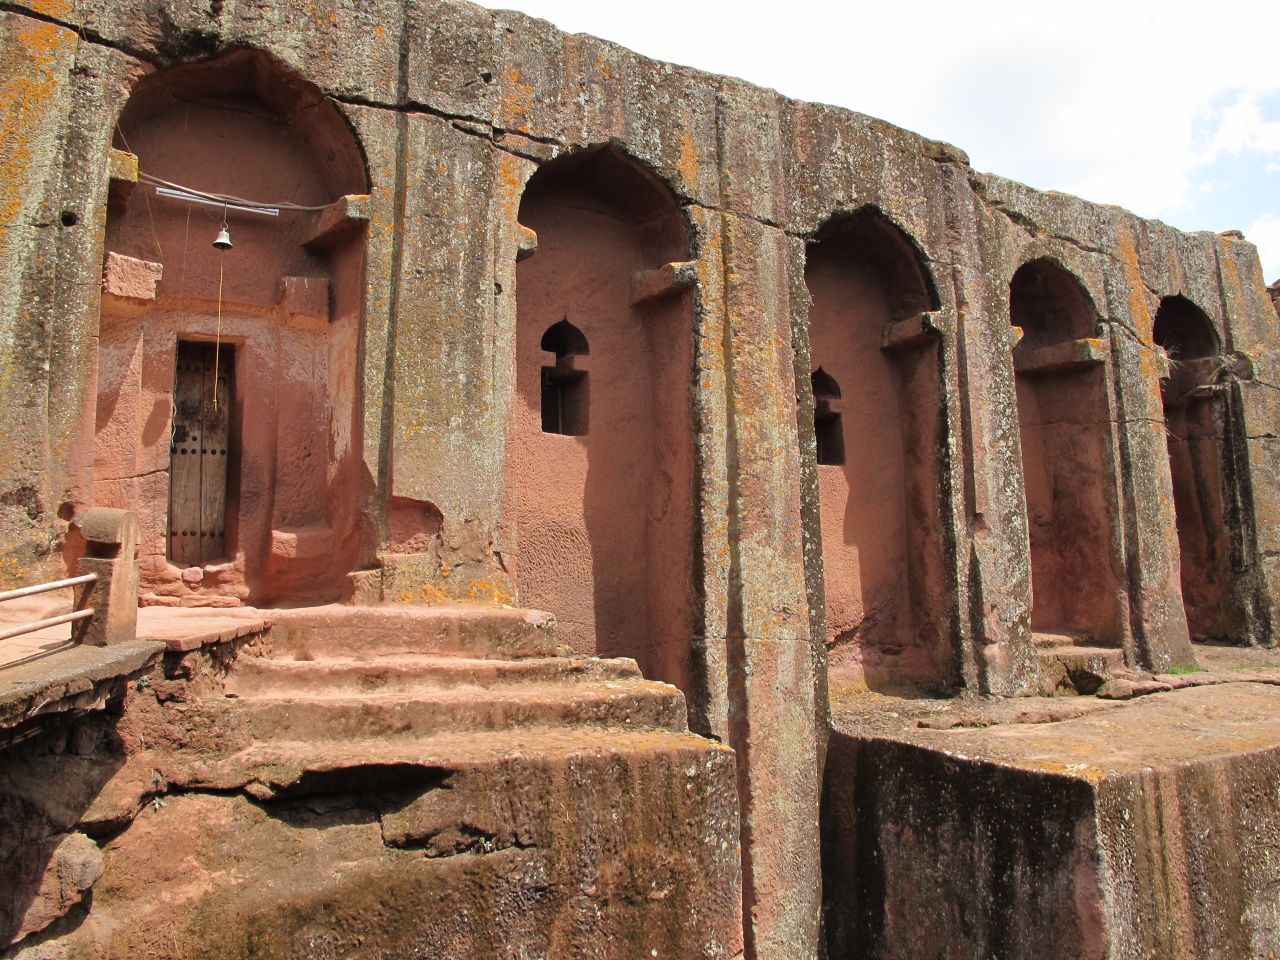 In Lalibela, the many sacred sites are linked by tunnels. The chiseled creations have turned this mountain town into a place of pride and pilgrimage for worshipers of the Ethiopian Orthodox Church, attracting 80,000 to 100,000 visitors every year.